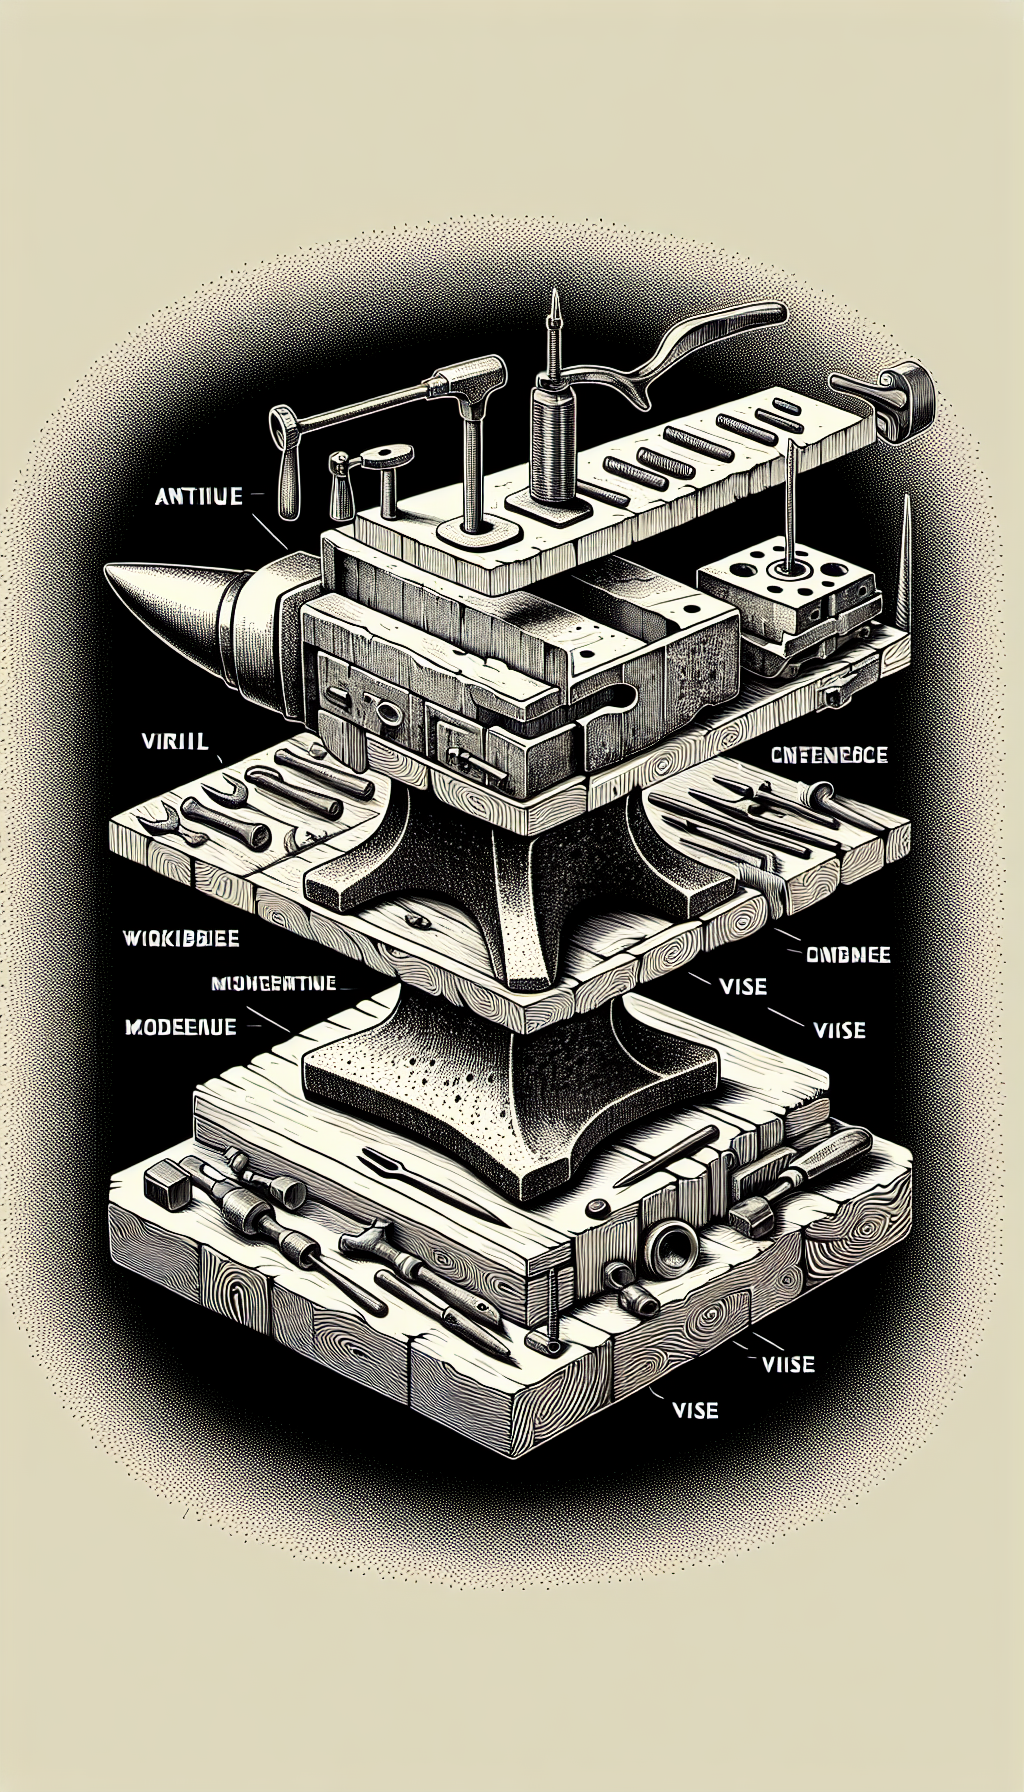 An illustration blending a timeworn anvil with modern workbench layers, dissecting the evolution of vise design in a cross-sectional view. Antique vises morph into contemporary styles as they spiral around an anvil-turned-time-capsule, with notable features highlighted for identification. Styles alternate from rough sketches to pixel art, symbolizing the transition from traditional forging to precise modern crafting.